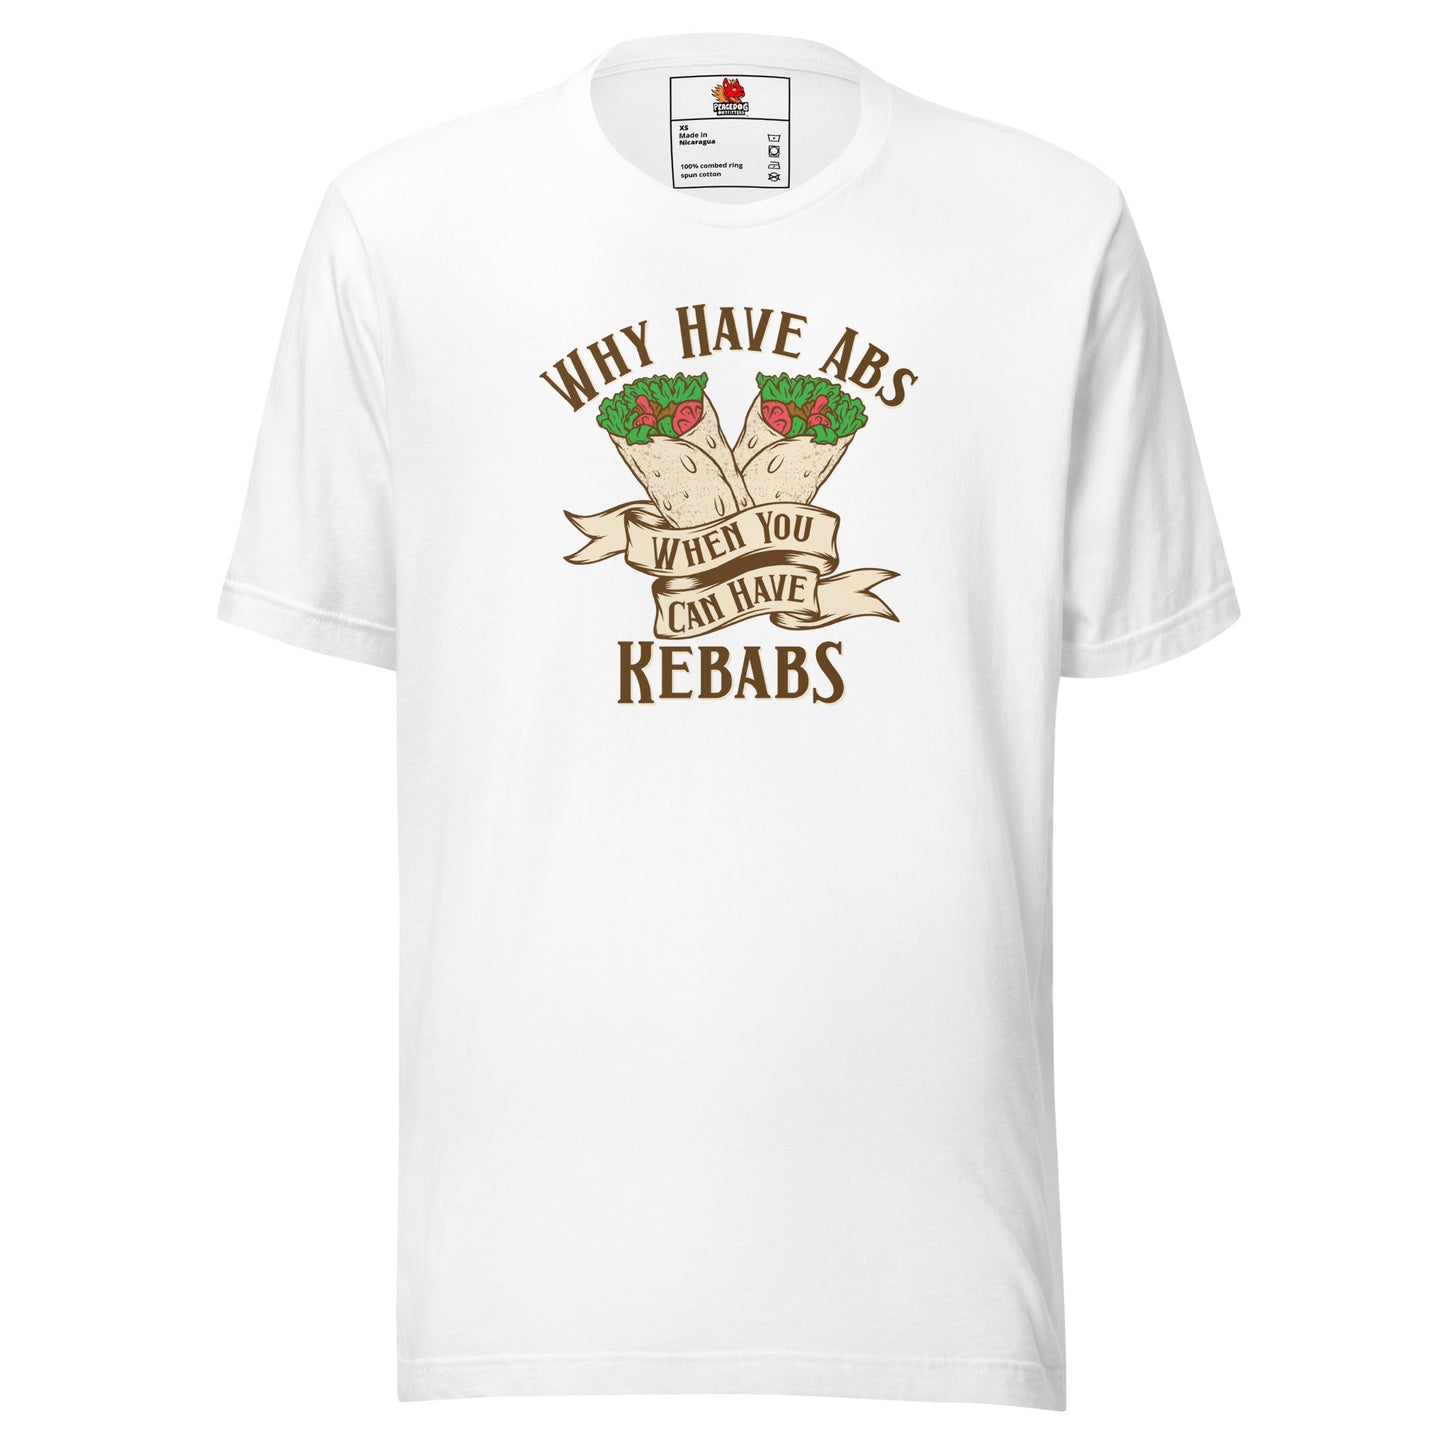 Why Have Abs When You Can Have Kebabs T-shirt